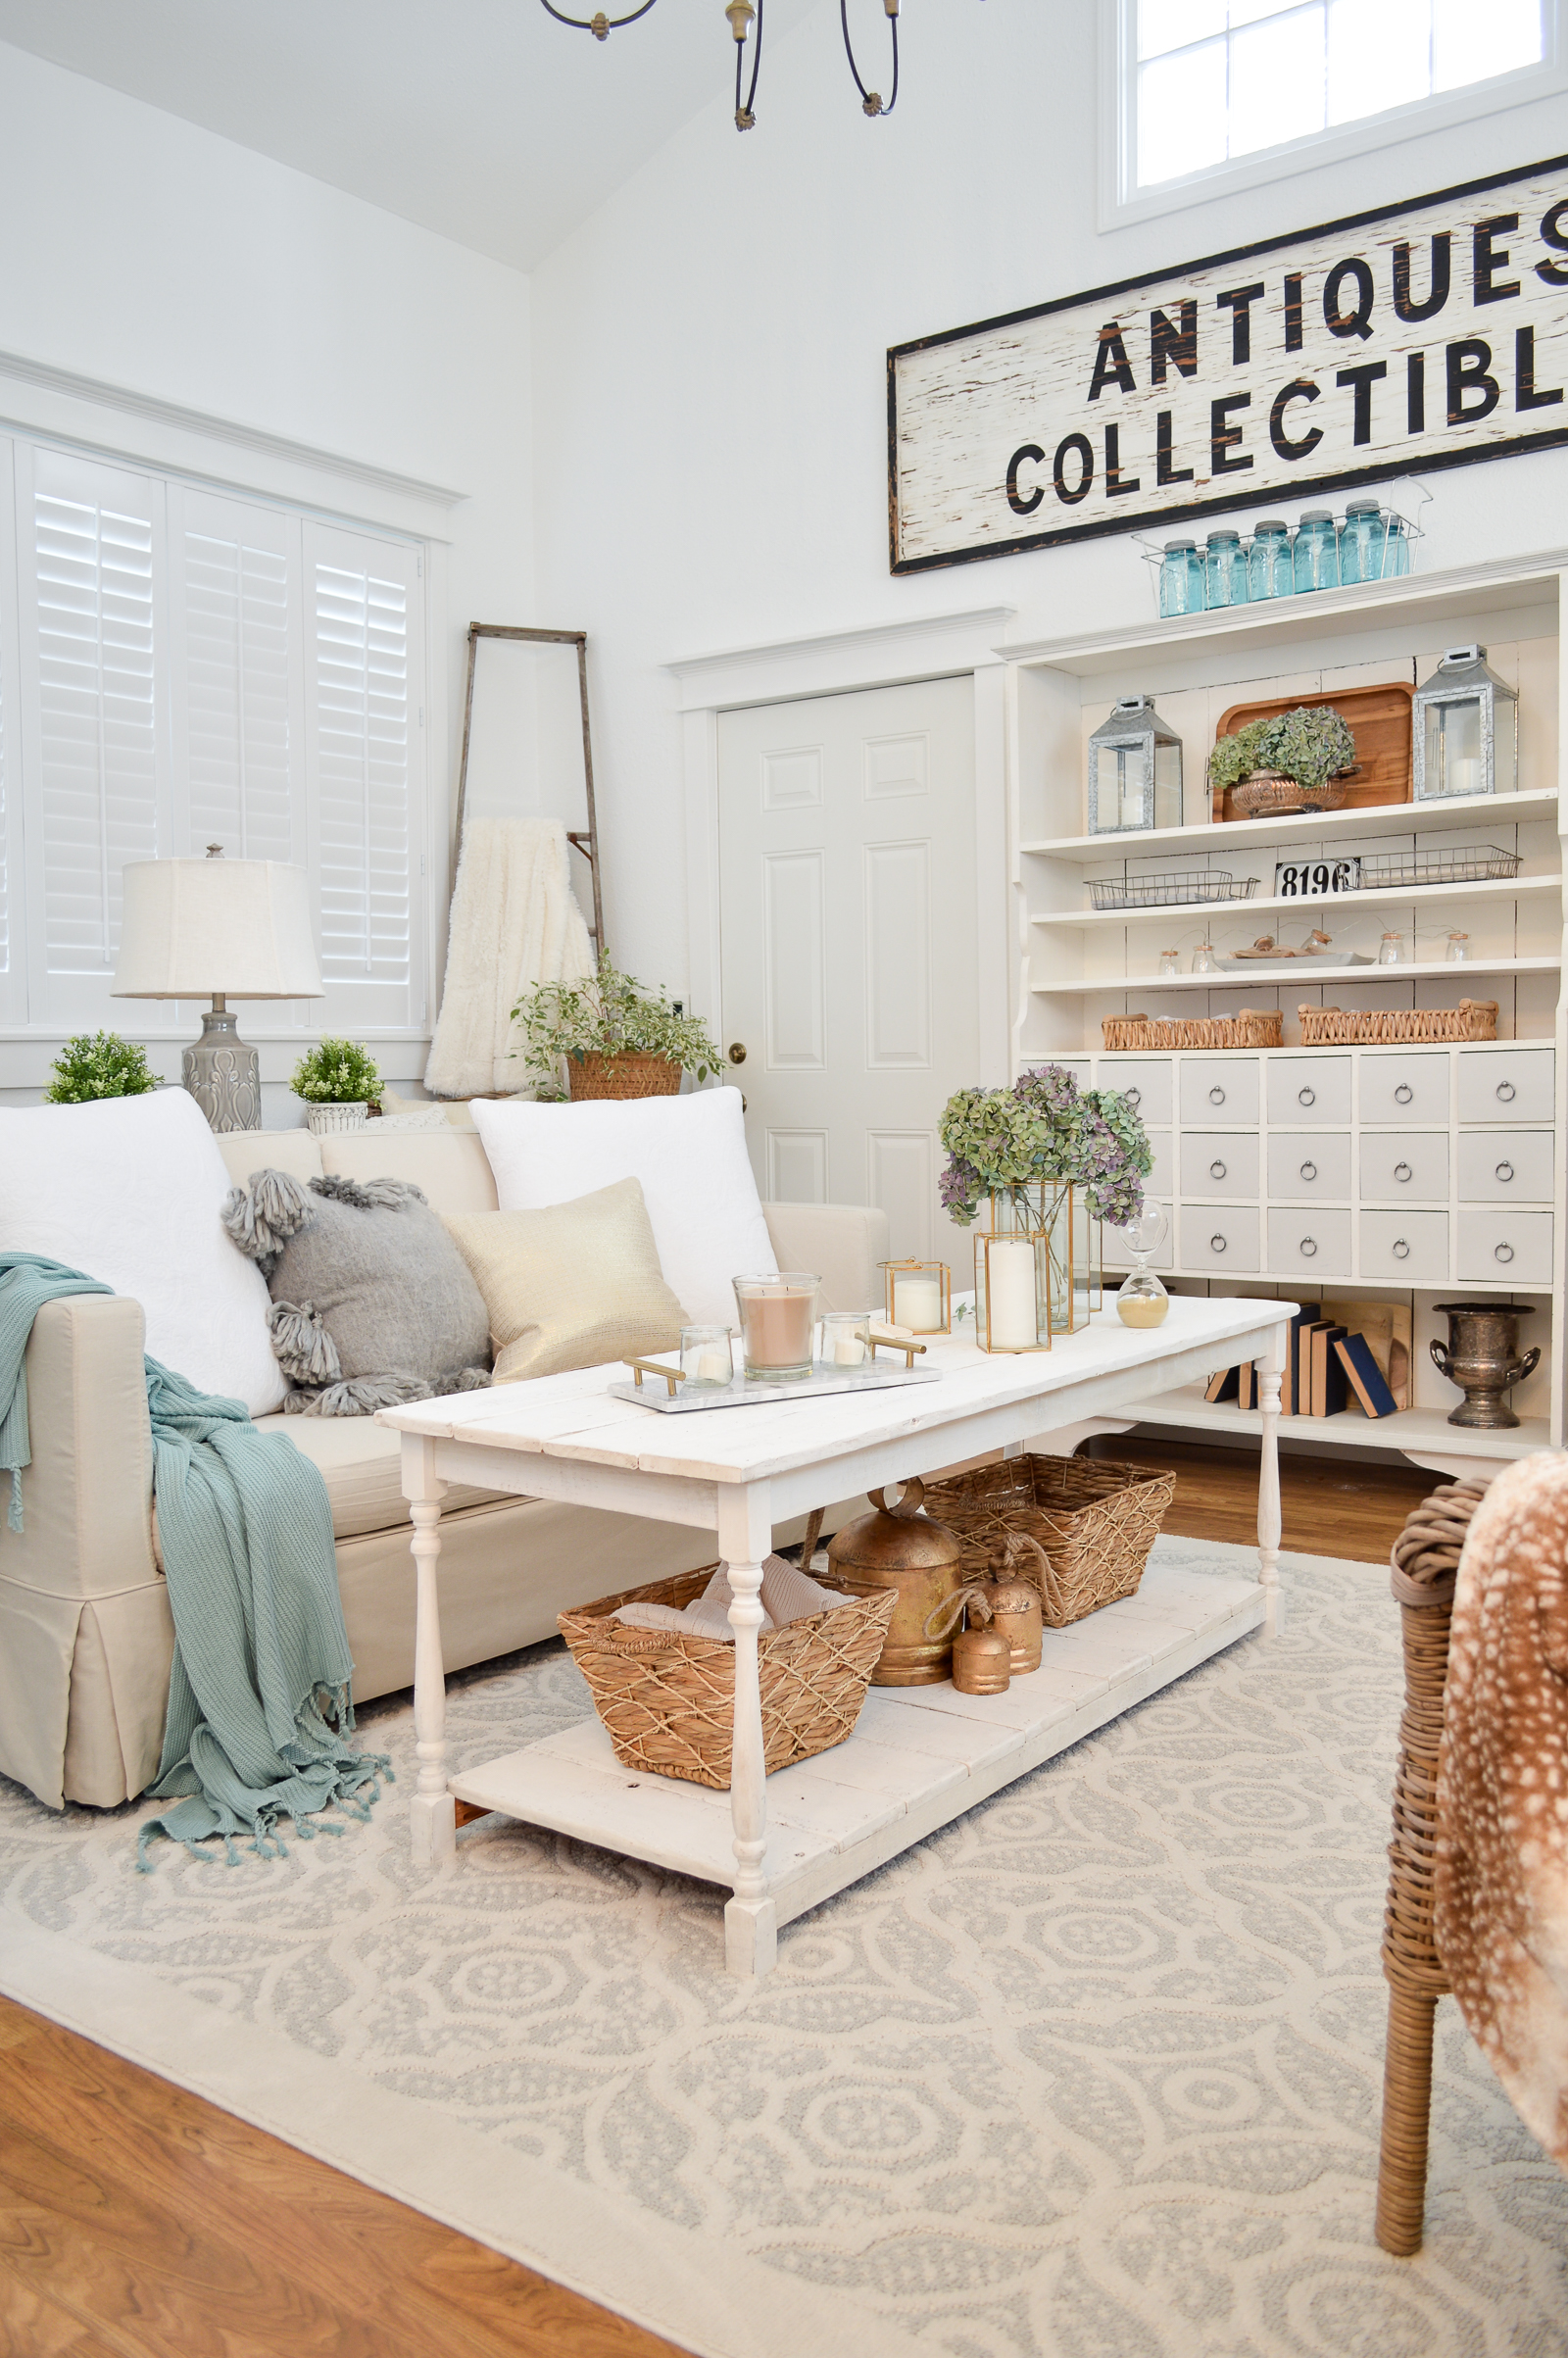 Collected + Cozy Cottage Living Room Makeover